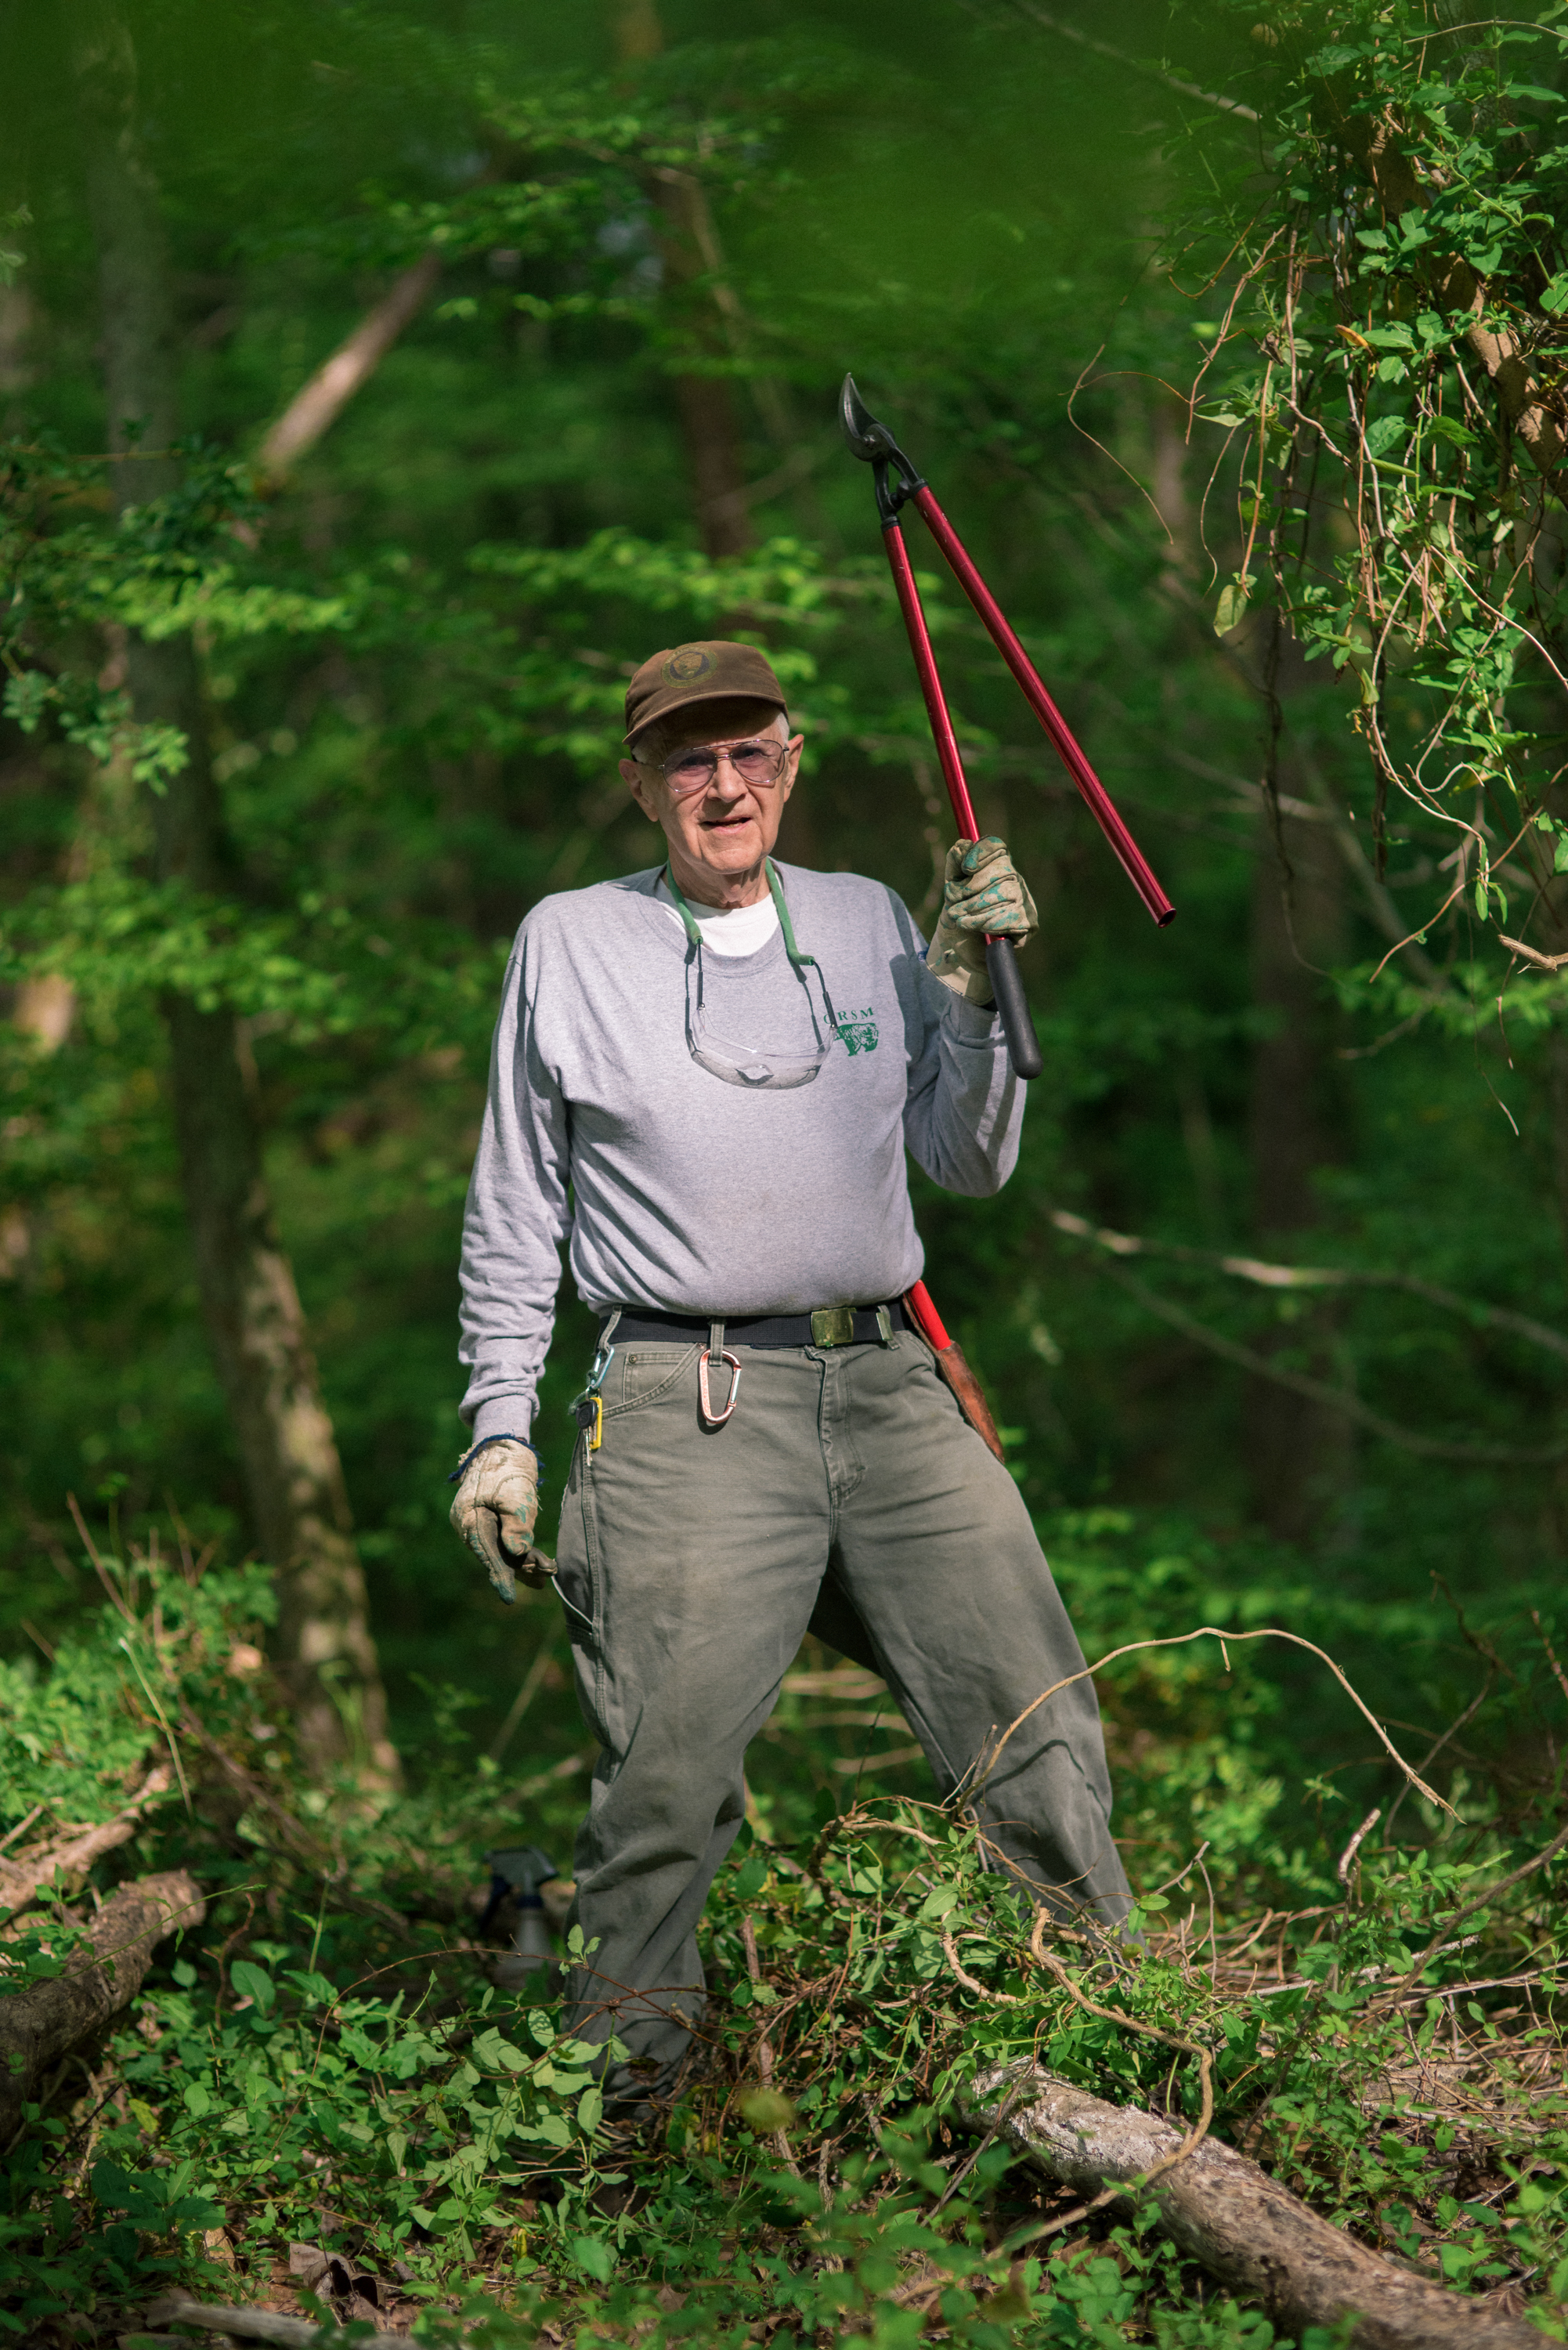 Paul "Doc" Hadala, a volunteer at Great Smoky Mountains National Park, works to eliminate invasive plant species from a section of forest.